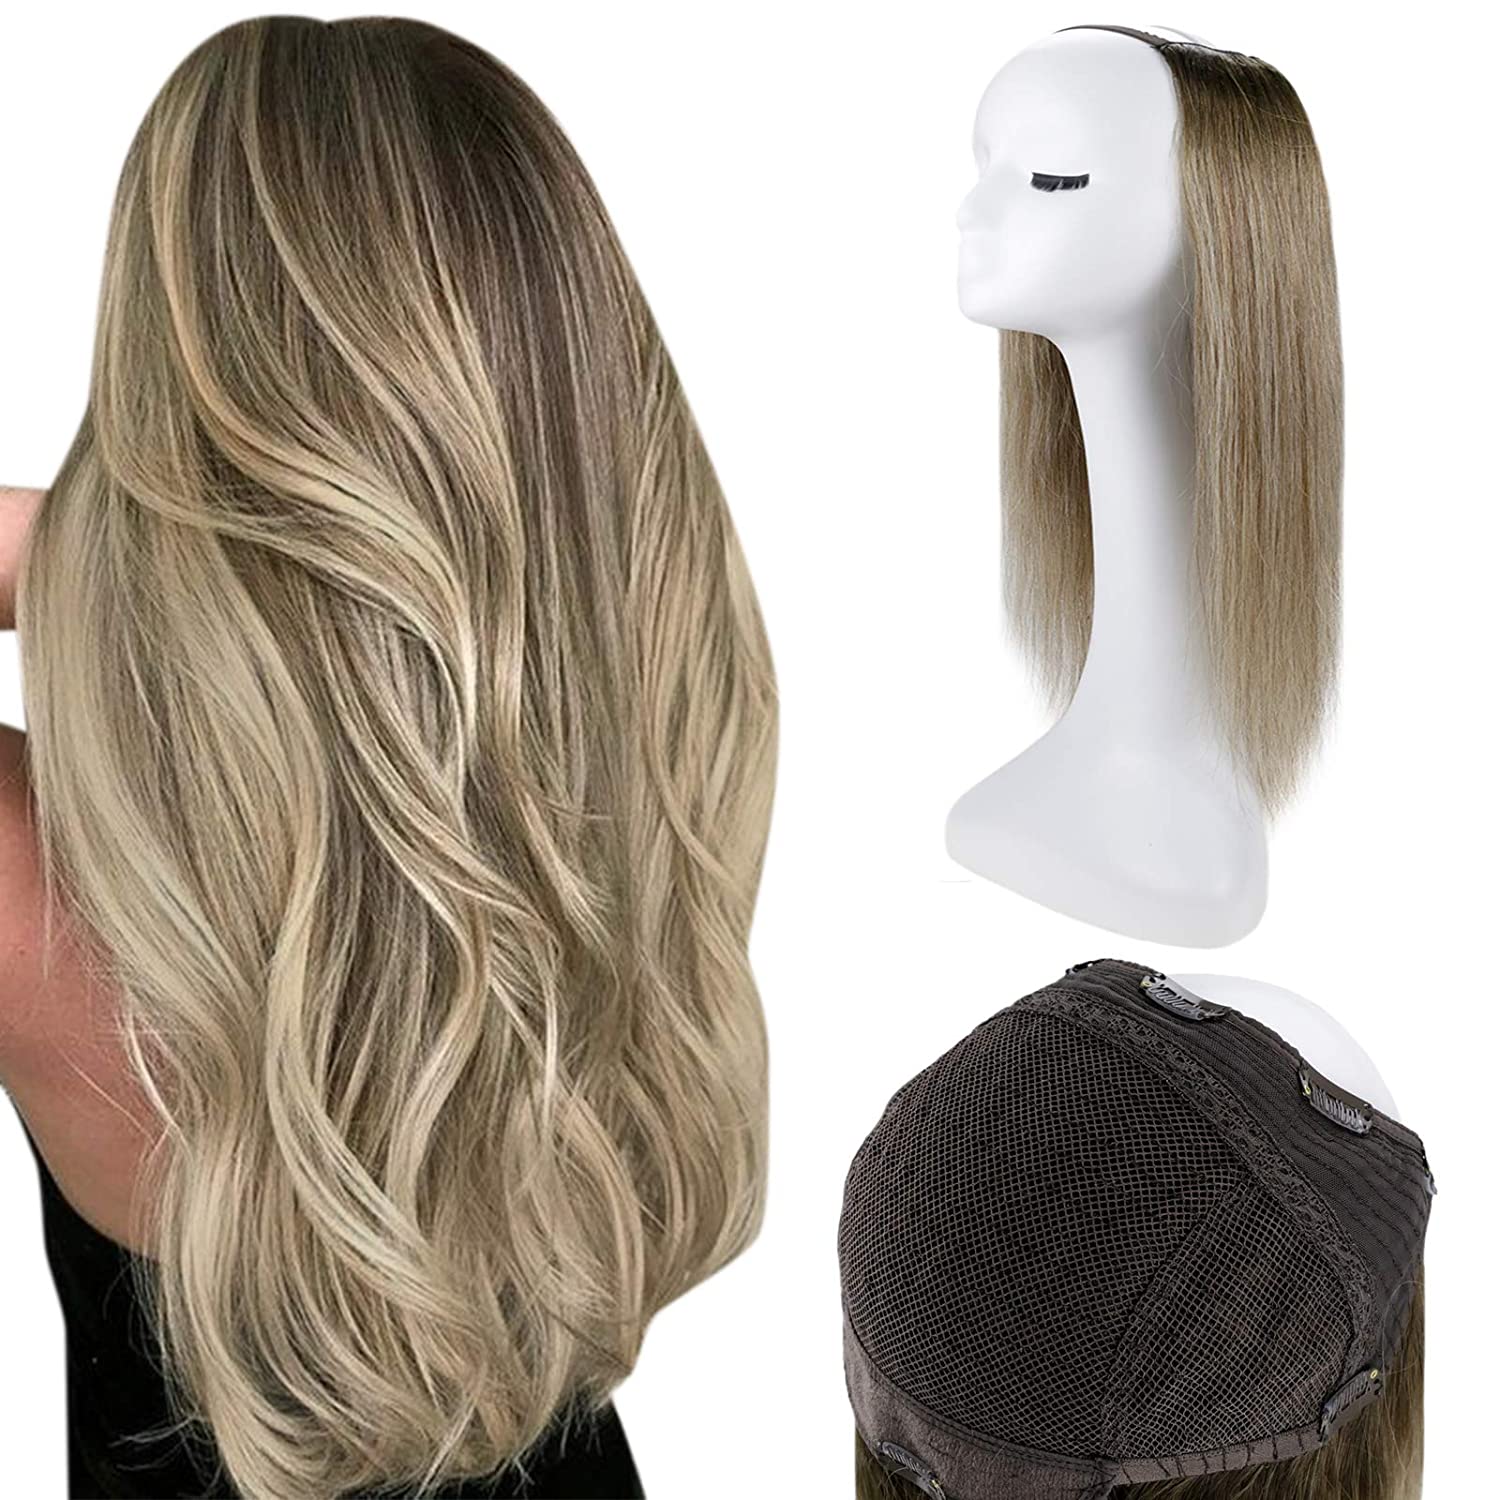 U Part Wig Real Hair Clip In Full Head One Piece Straight Extensions Remy One Piece Hair Extensions Color #3 Fading To Color #8 Ash Brown And Color #22 Blonde - FShine Shop